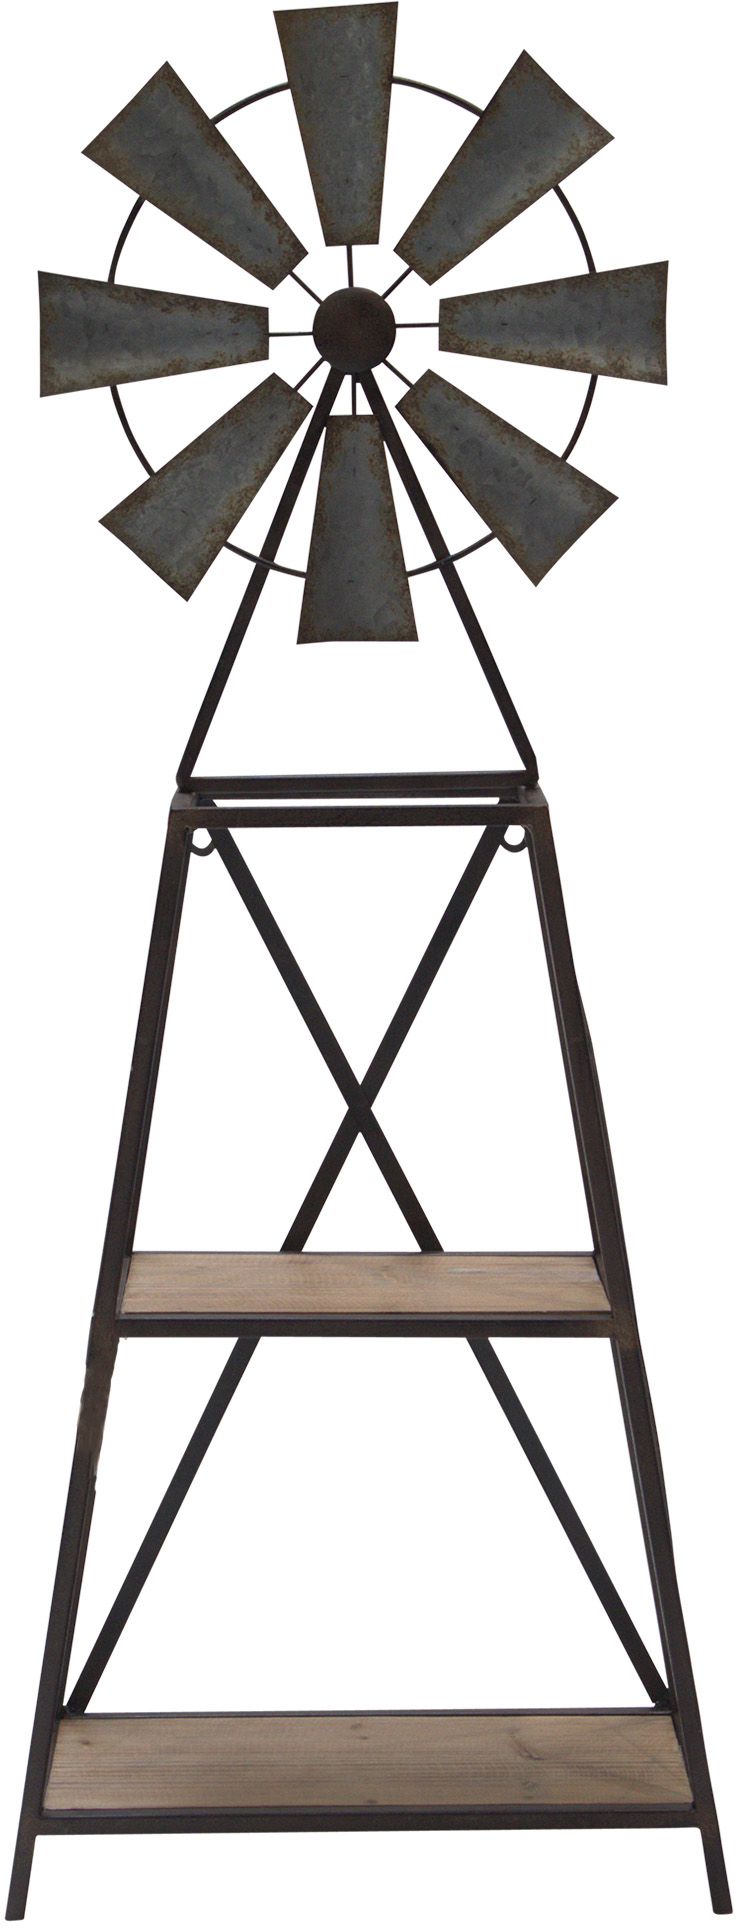 37"H METAL WINDMILL WITH TWO SHELVES